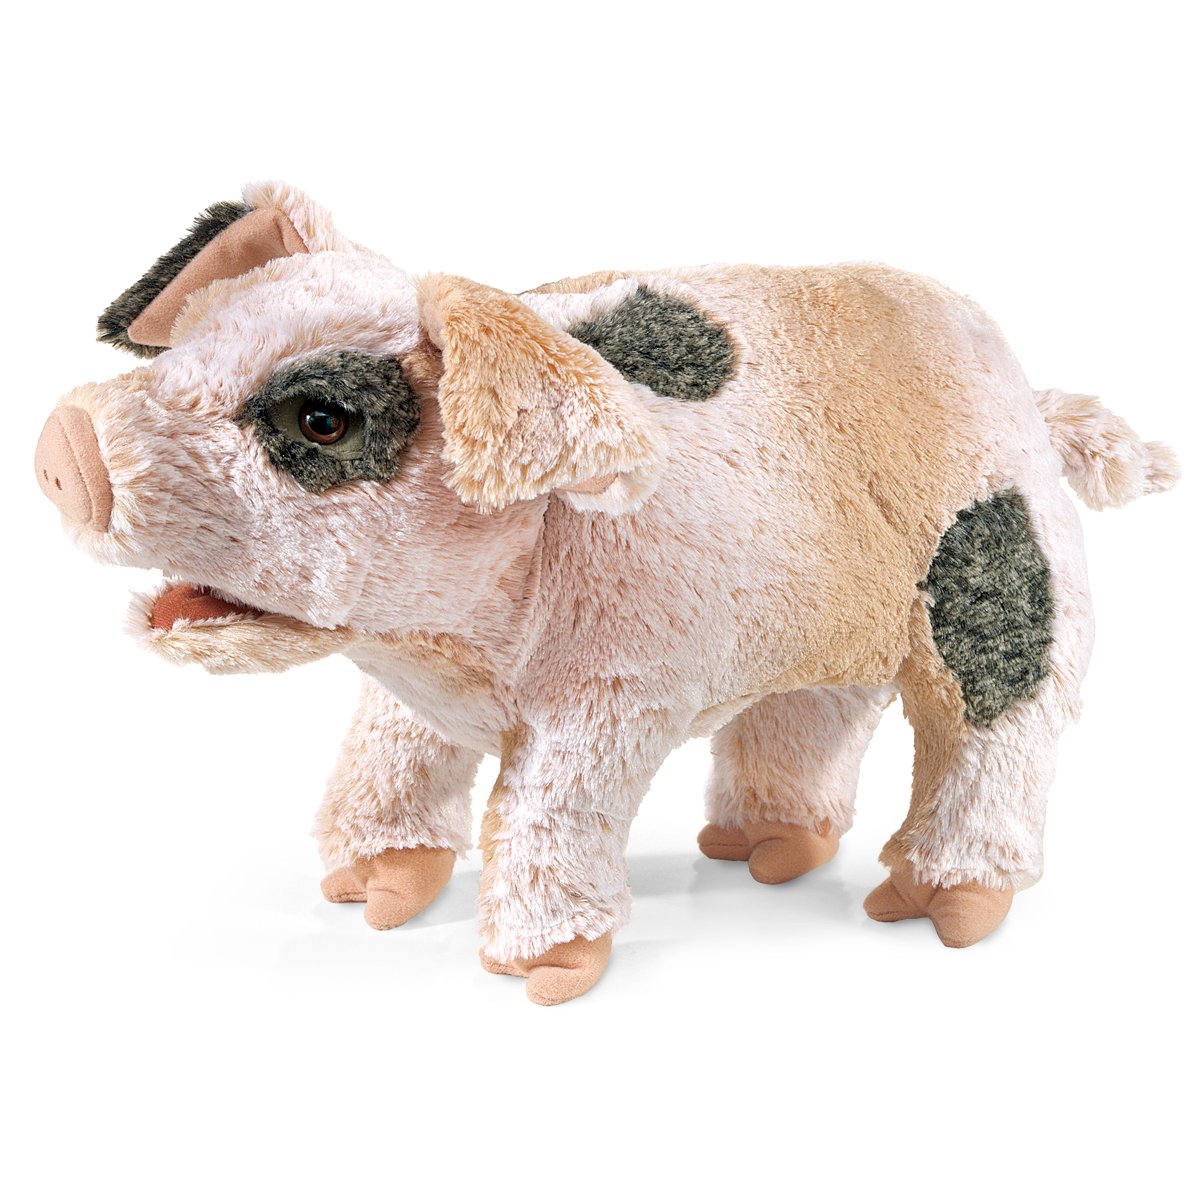 Discovery Kids Grunting Hand Puppet In The Form Of A Pig